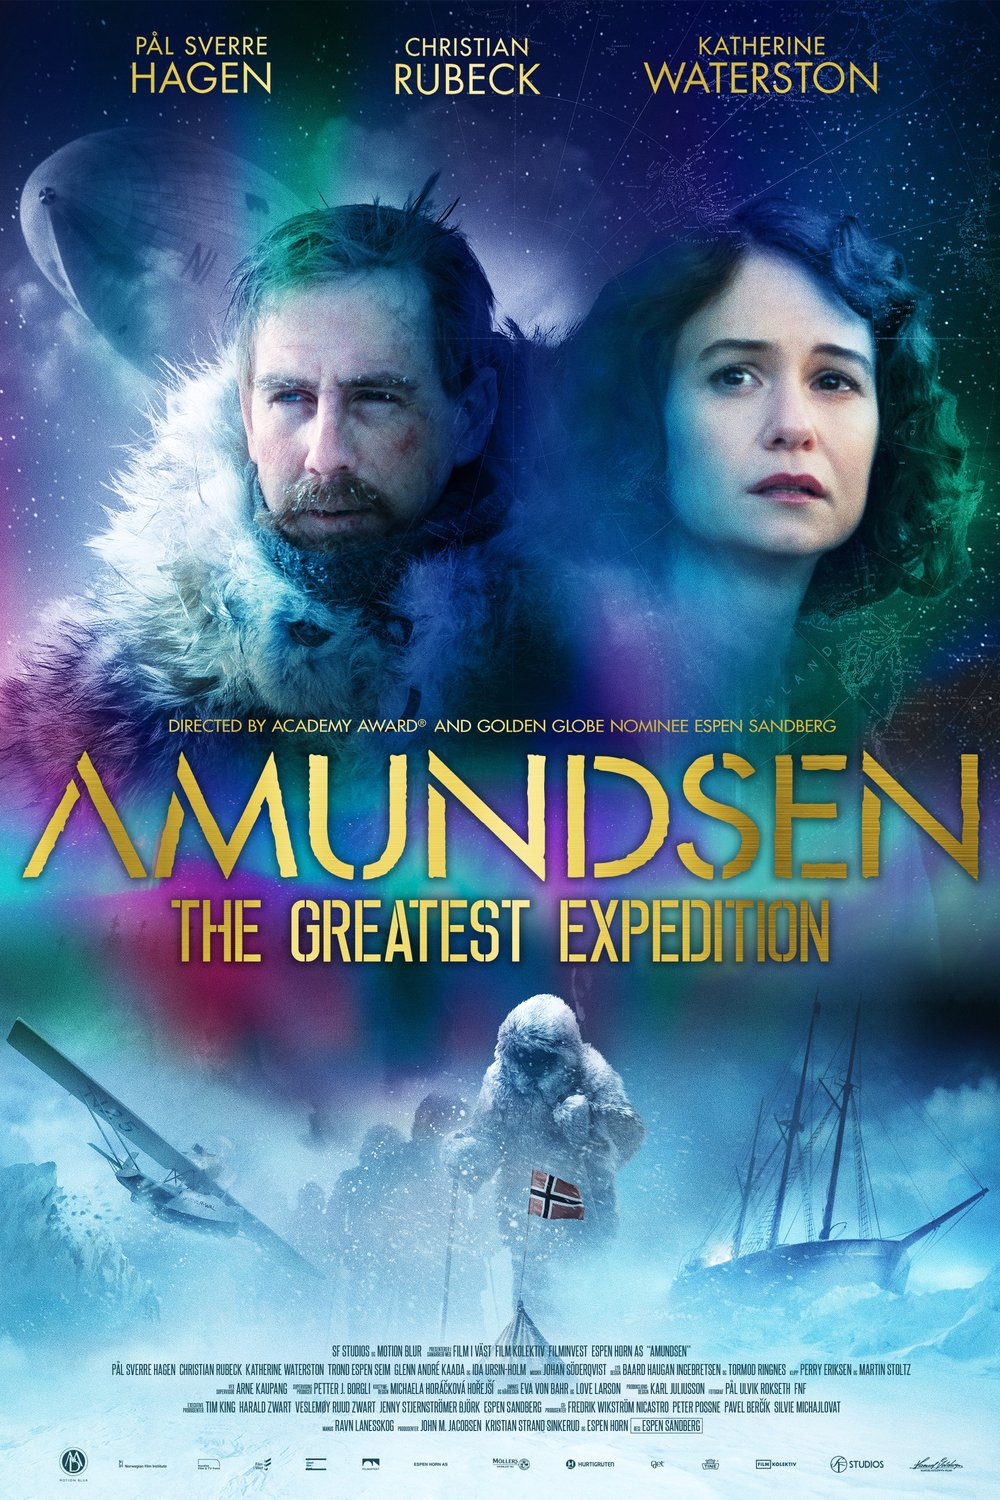 Poster of the movie Amundsen: The Greatest Expedition